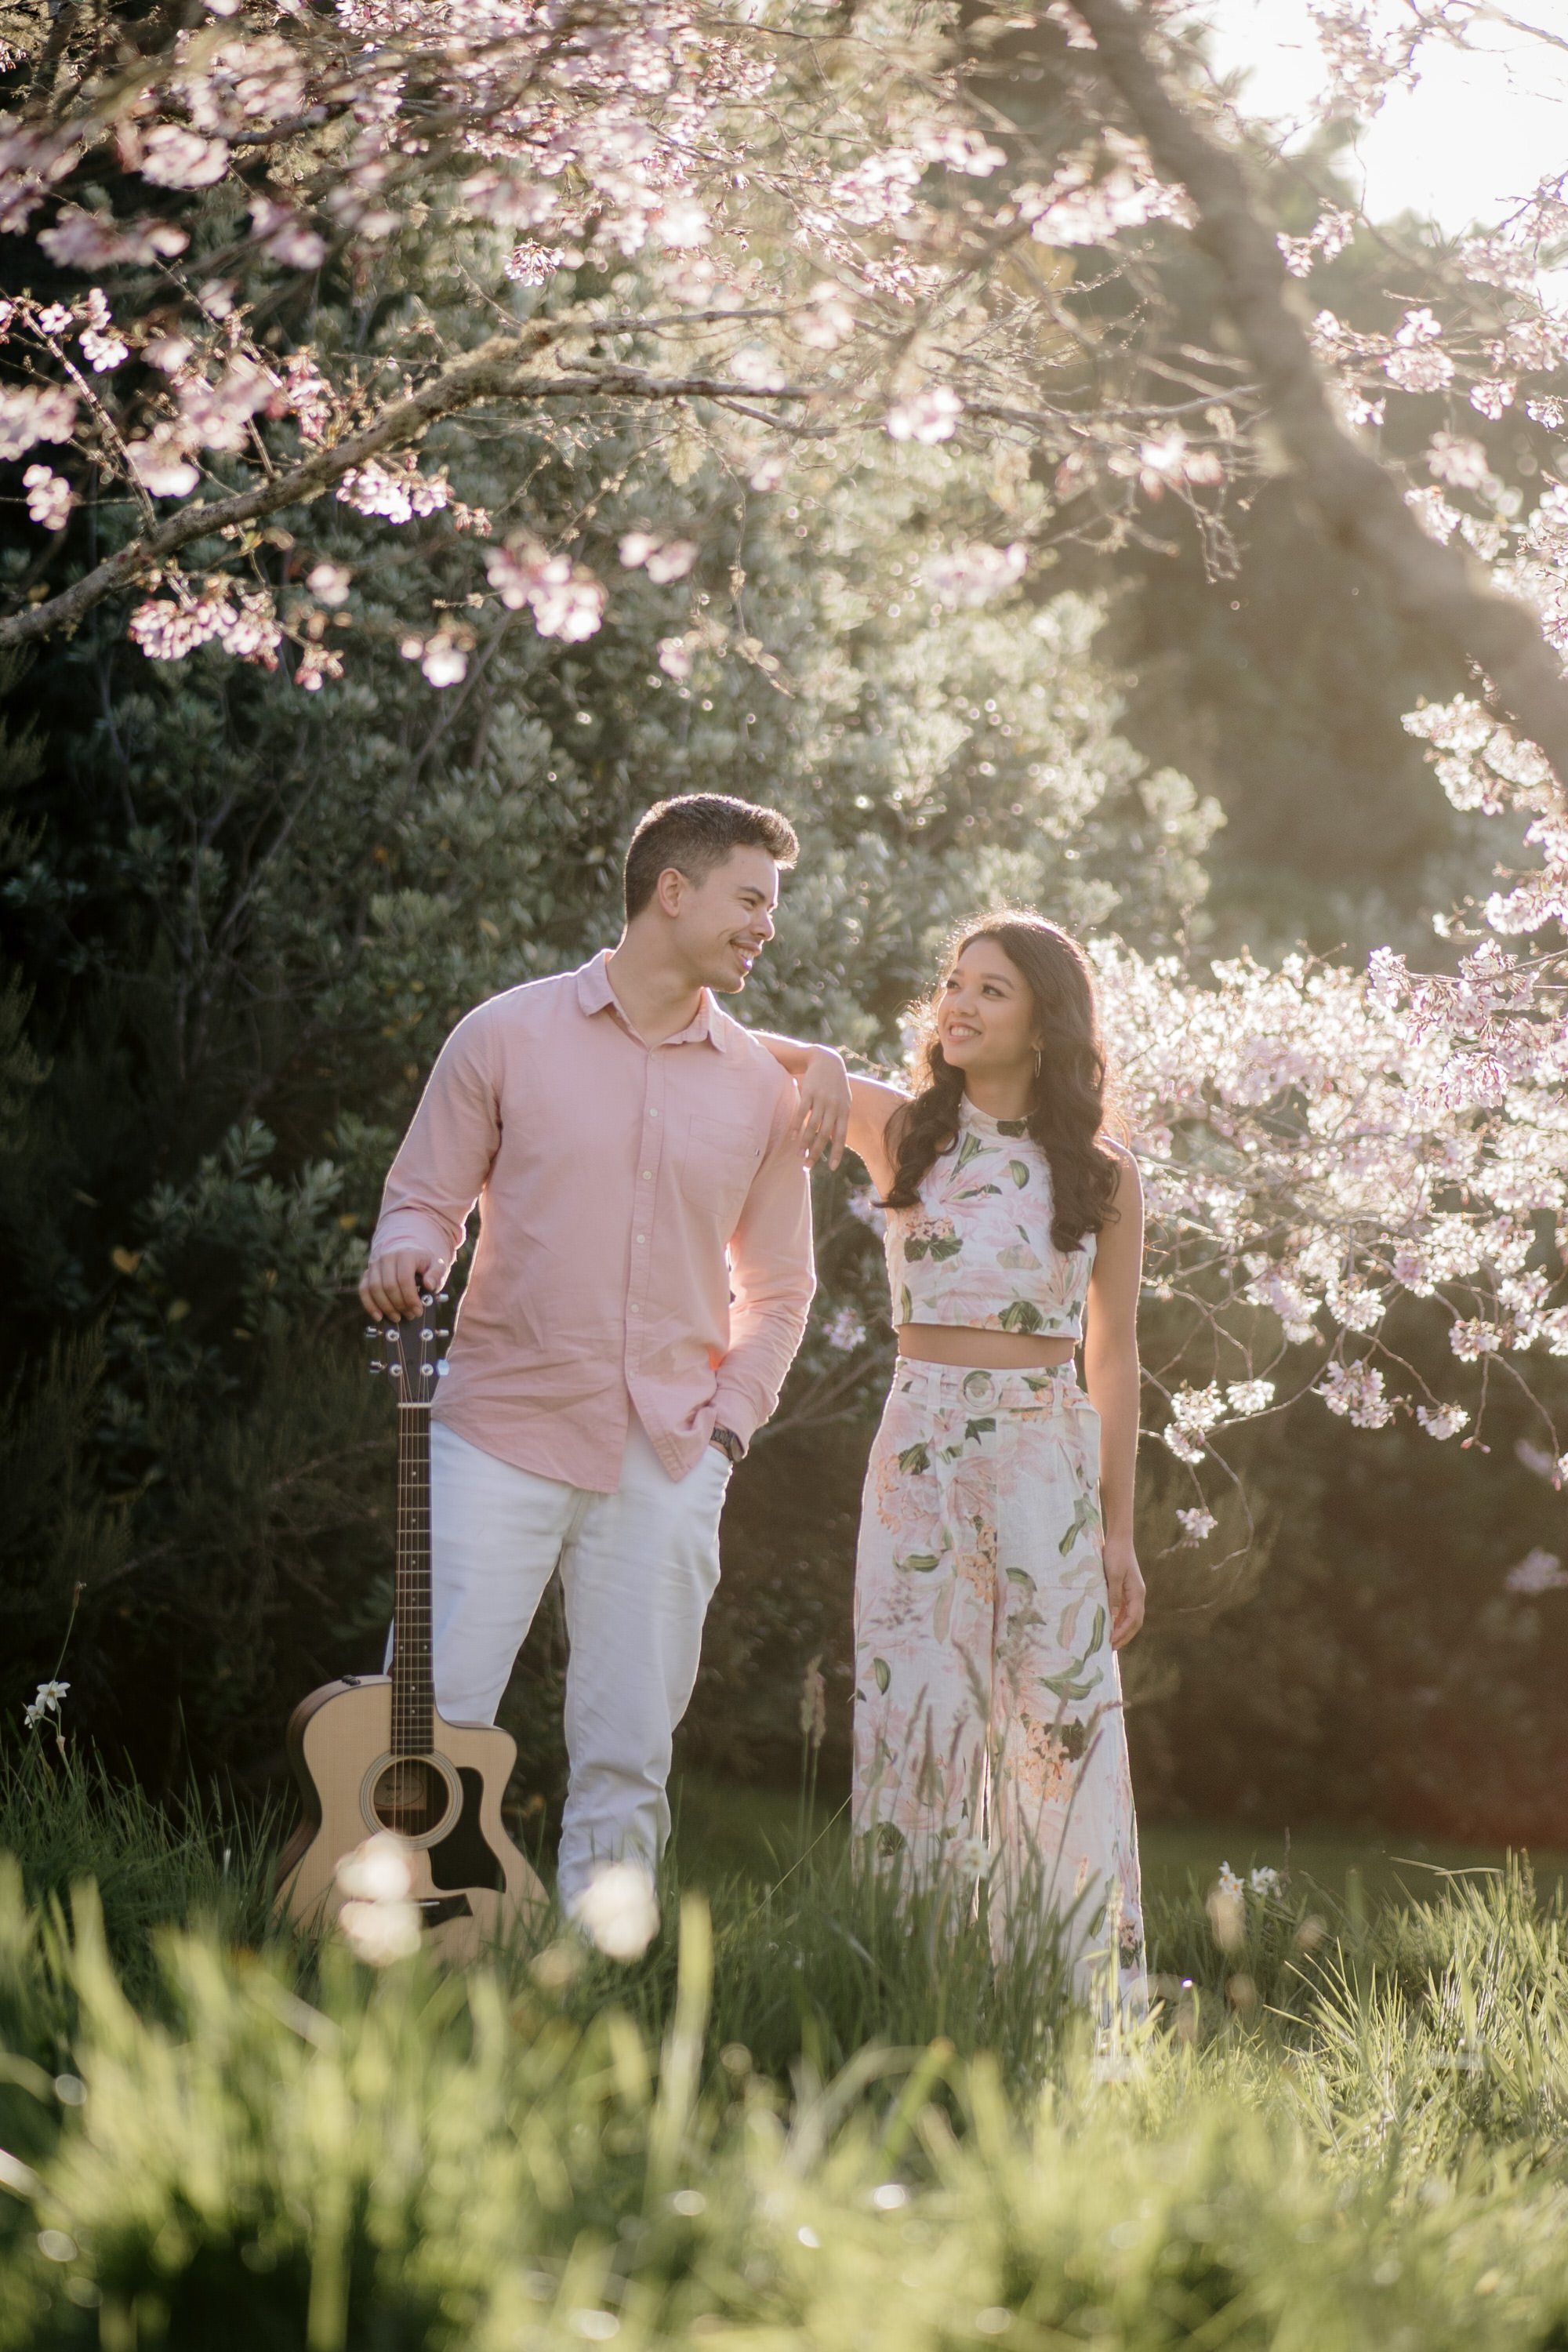 nate-and-thea-singers-duo-2023-top-auckland-wedding-phtographer-photography-videography-film-new-zealand-NZ-best-band-cherry-blossom-botanical-garden-engagement-elopement-dear-white-productions (67).jpg